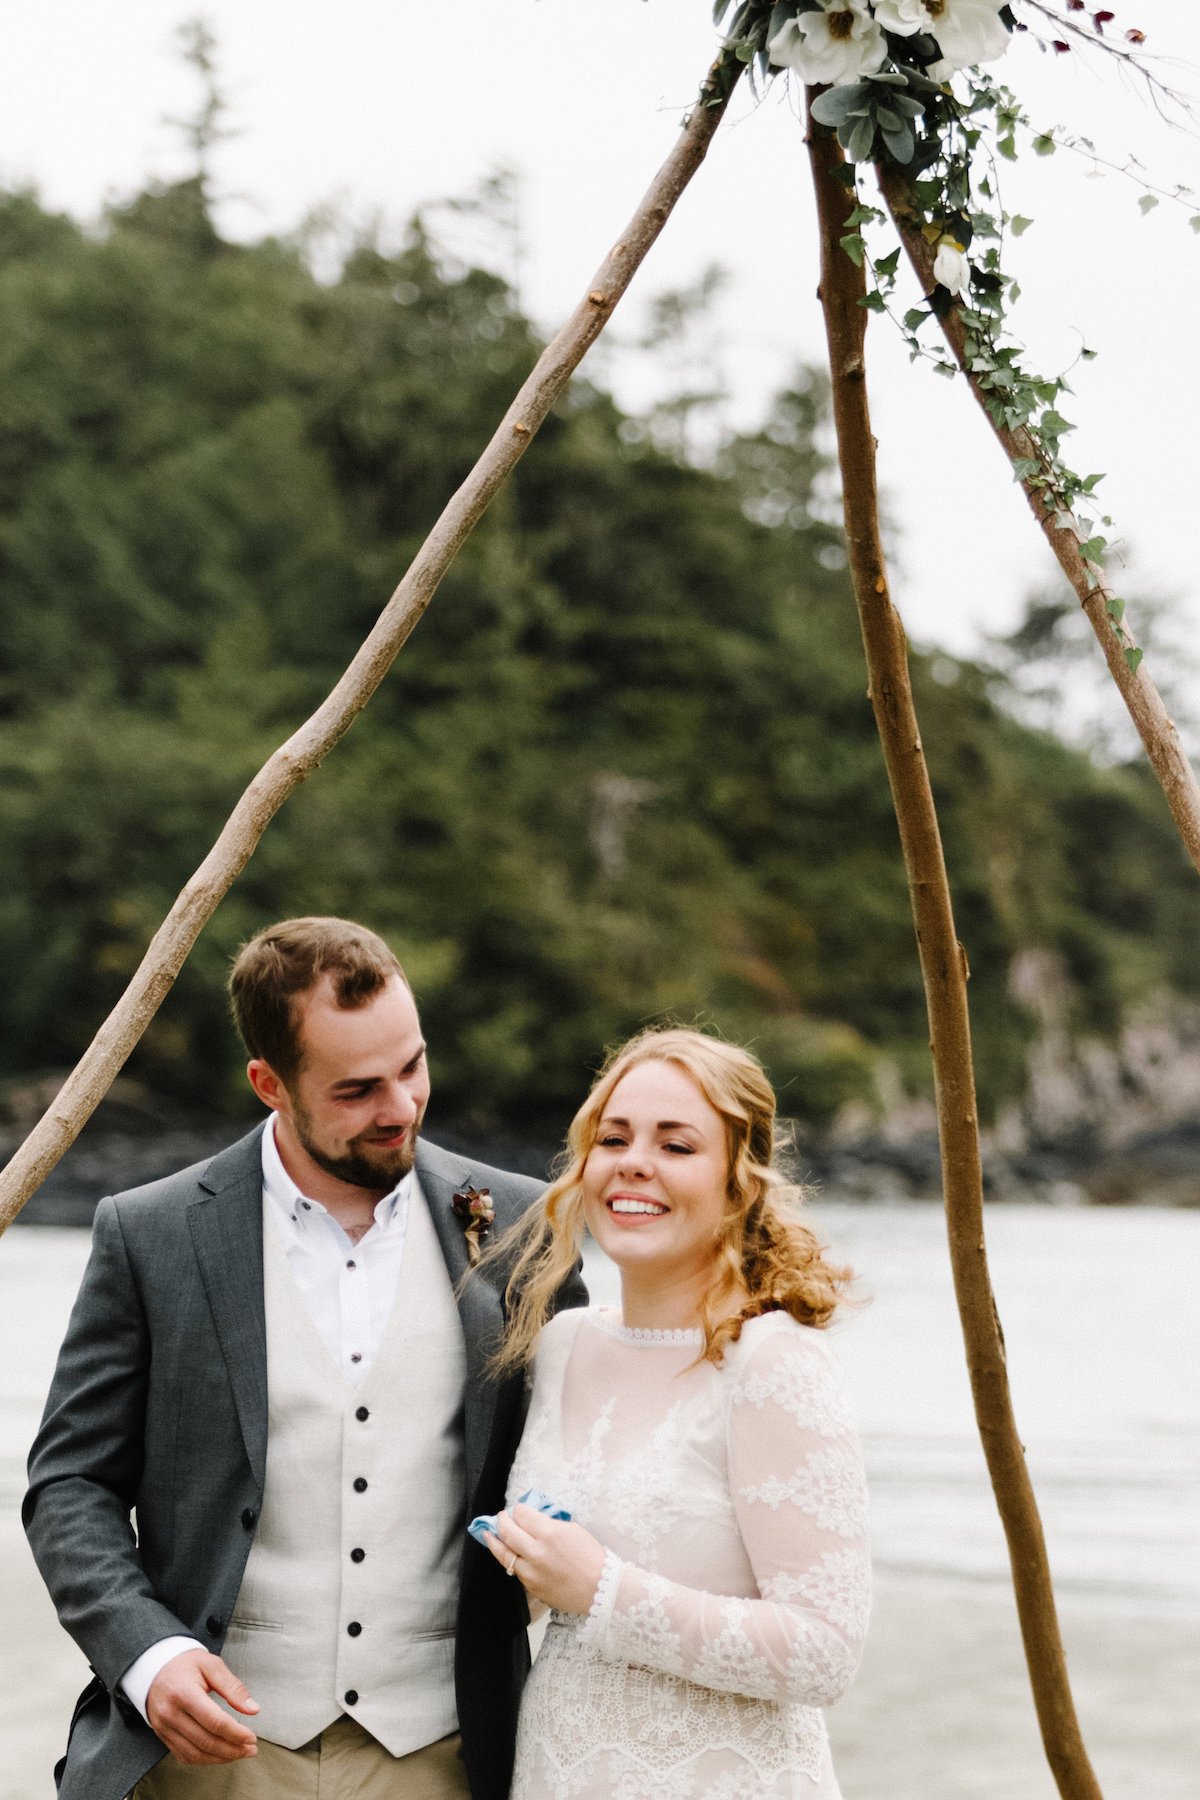 an-intimate-wedding-with-just-8-guests-in-a-dreamy-setting-bride-wearing-long-simple-wedding-dress-with-crochet-adornments